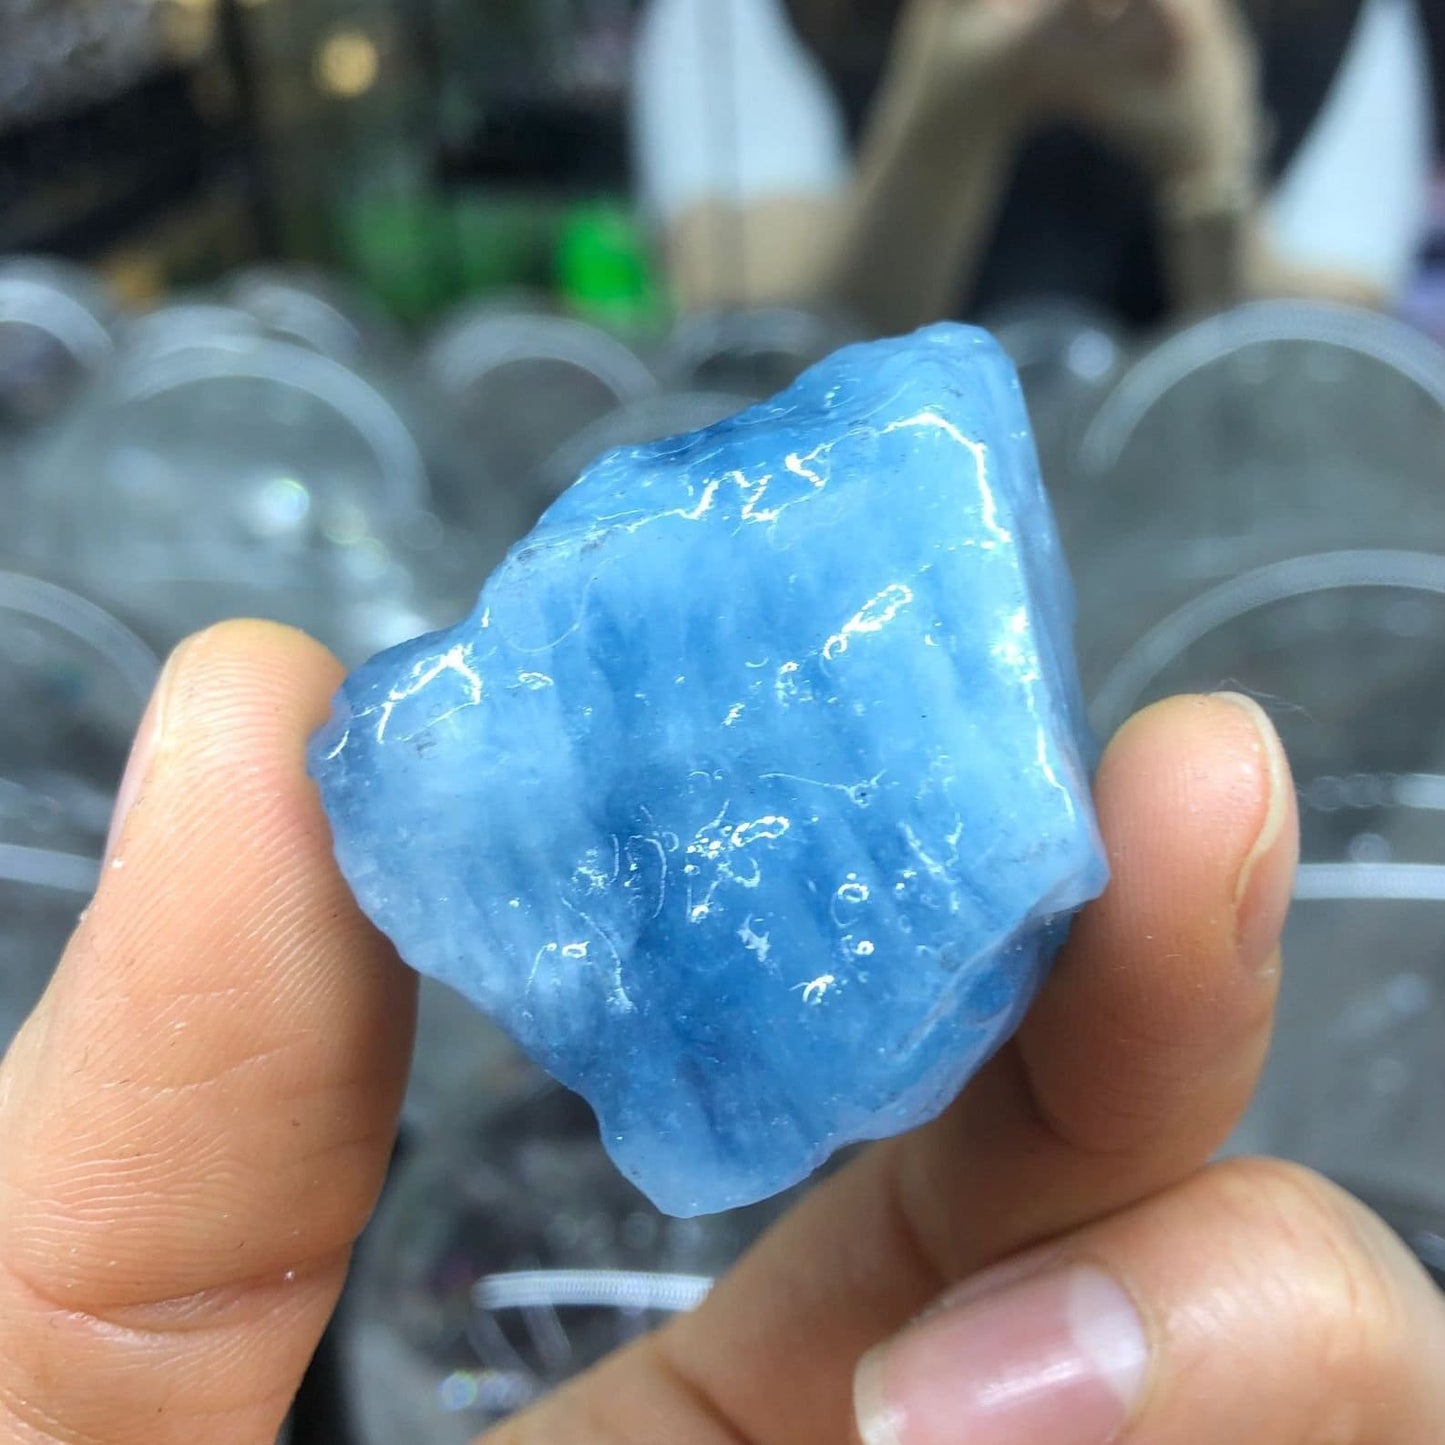 50g Natural Aquamarine Raw Stone Crystal Quartz Rock - Collectible Mineral Specimen for Healing, Home Decor, and Gifting - 1 Piece